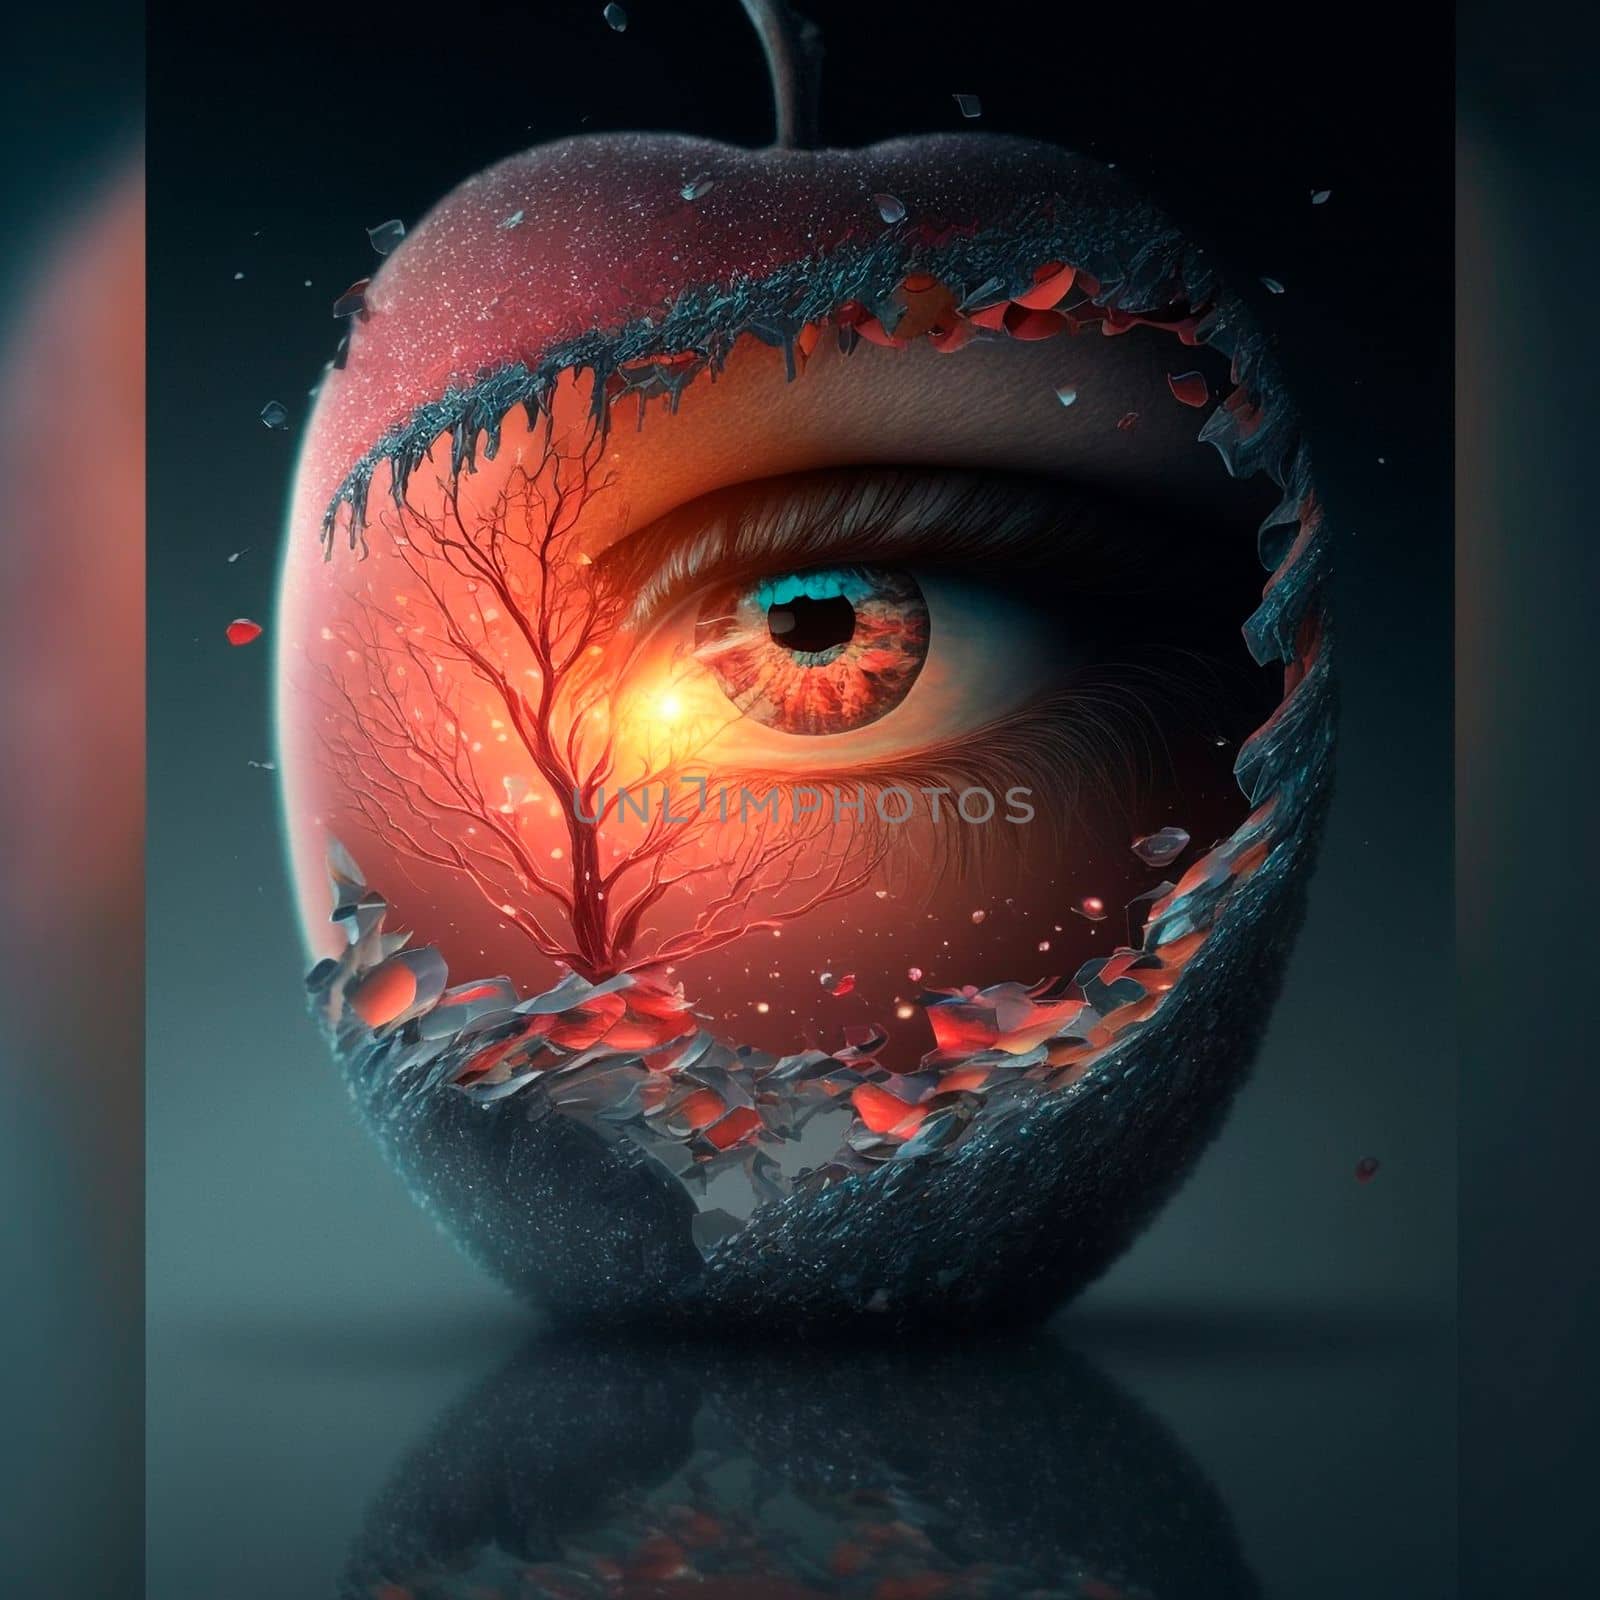 Look of a girl inside a frosty red apple. High quality illustration